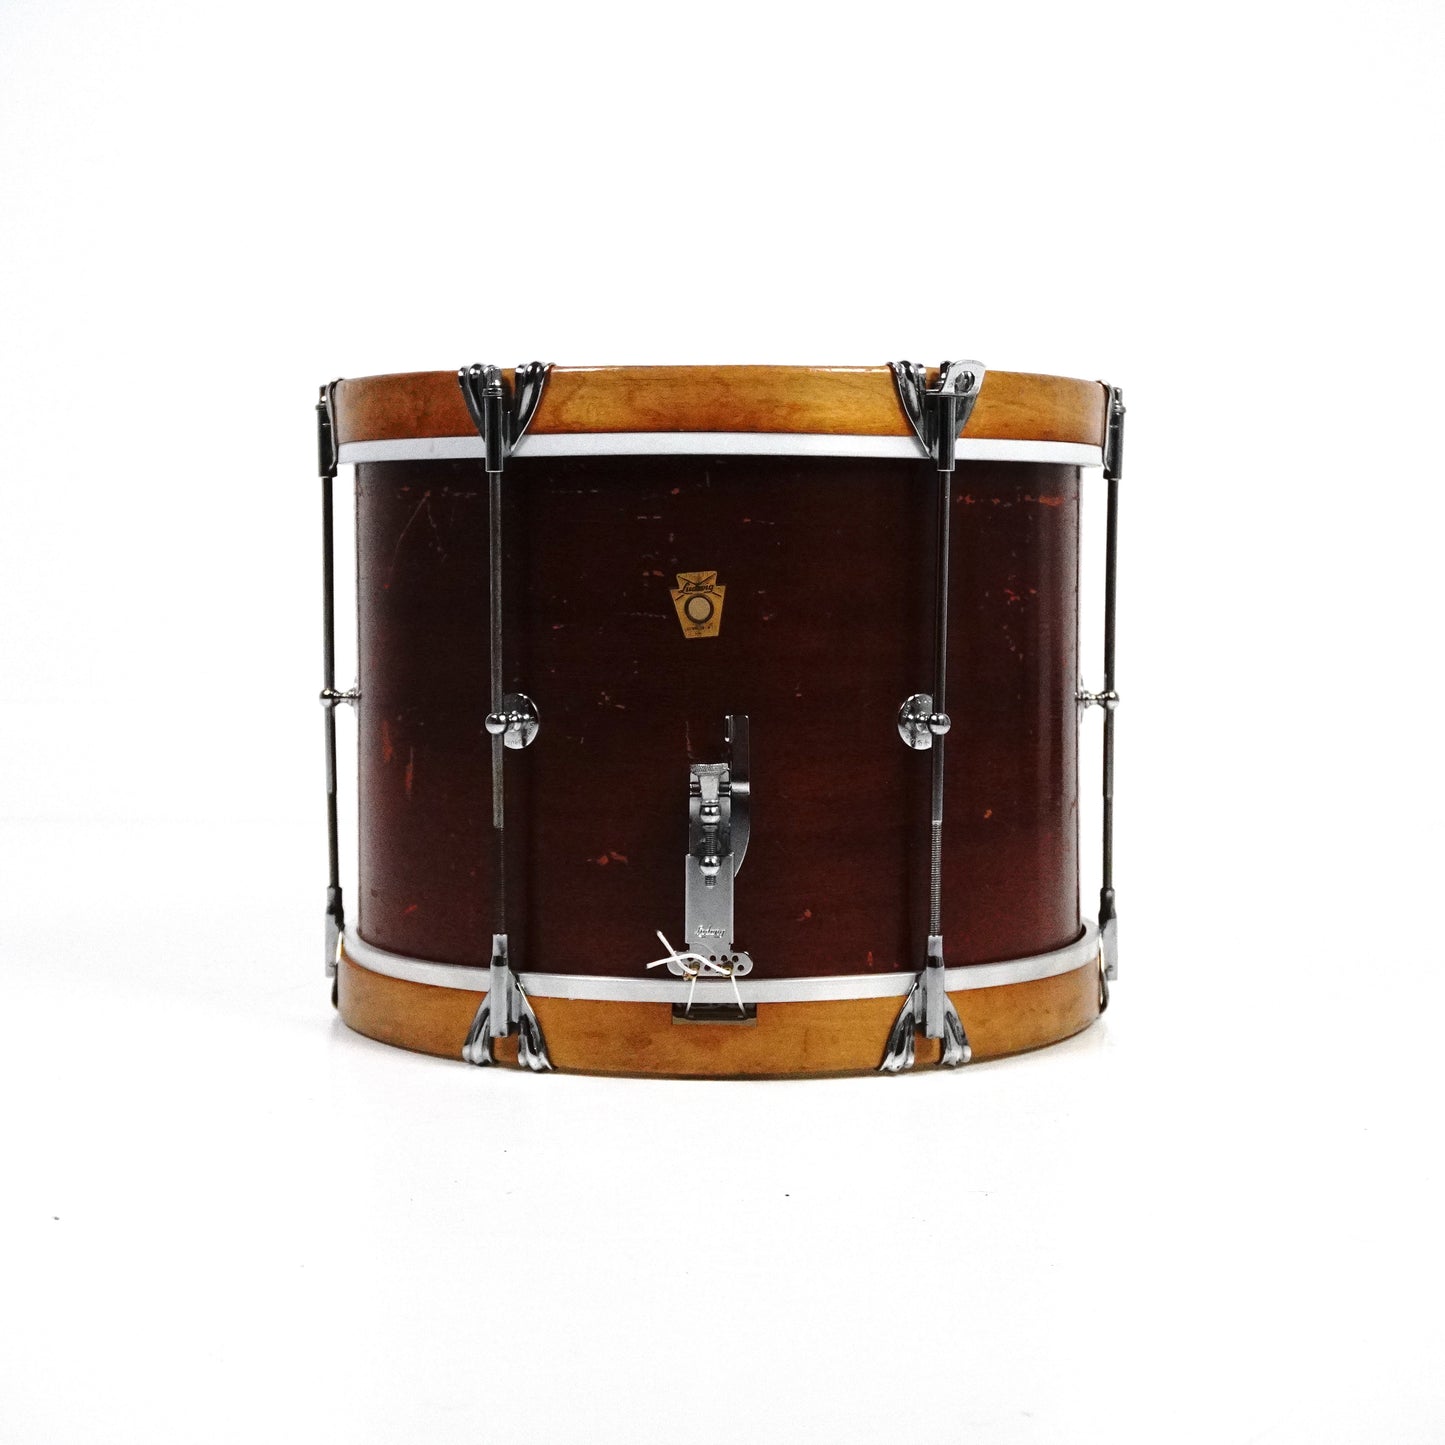 Ludwig 14” x 11” Marching Snare Drum from 1964-1965